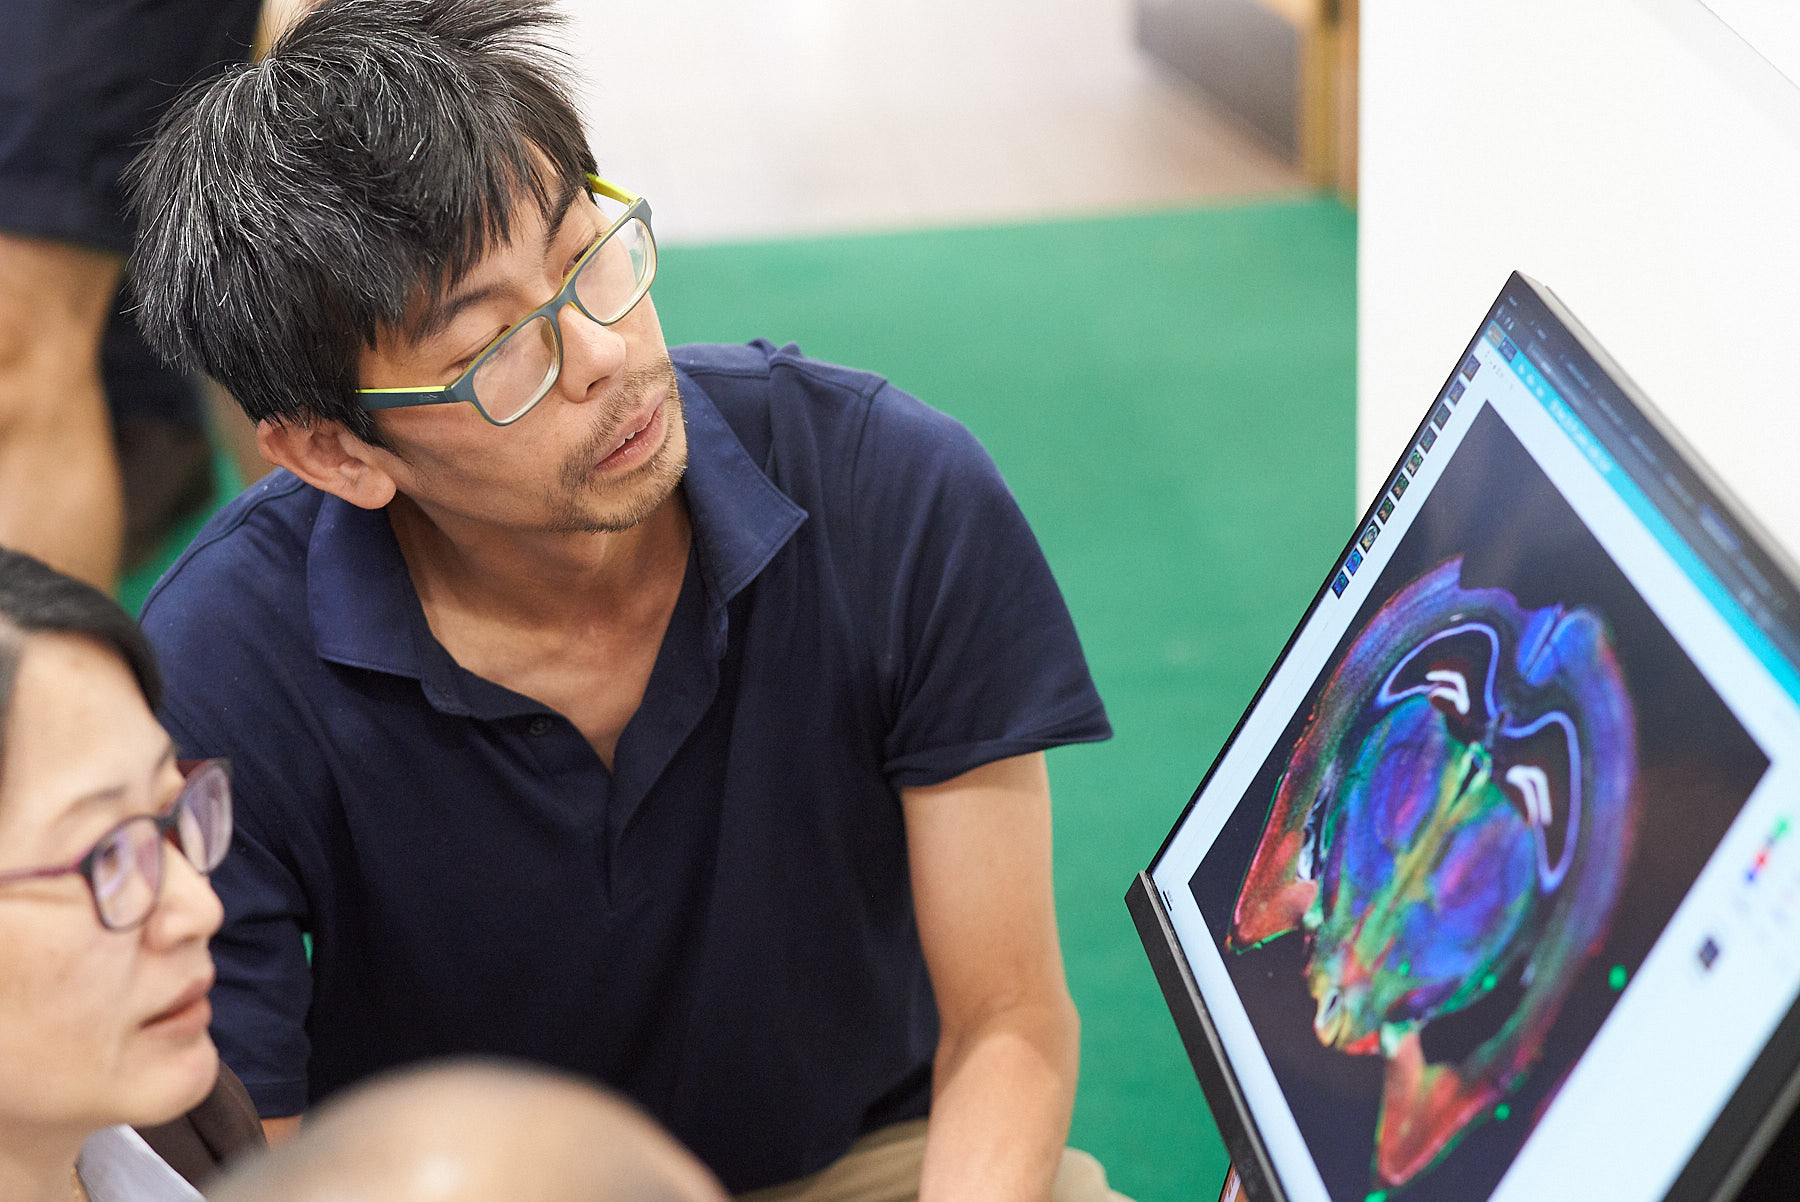 Unit scientist Kouichi Nakamura demonstrates a web-based interface for sharing his chemoarchitectonic atlas of the mouse brain.